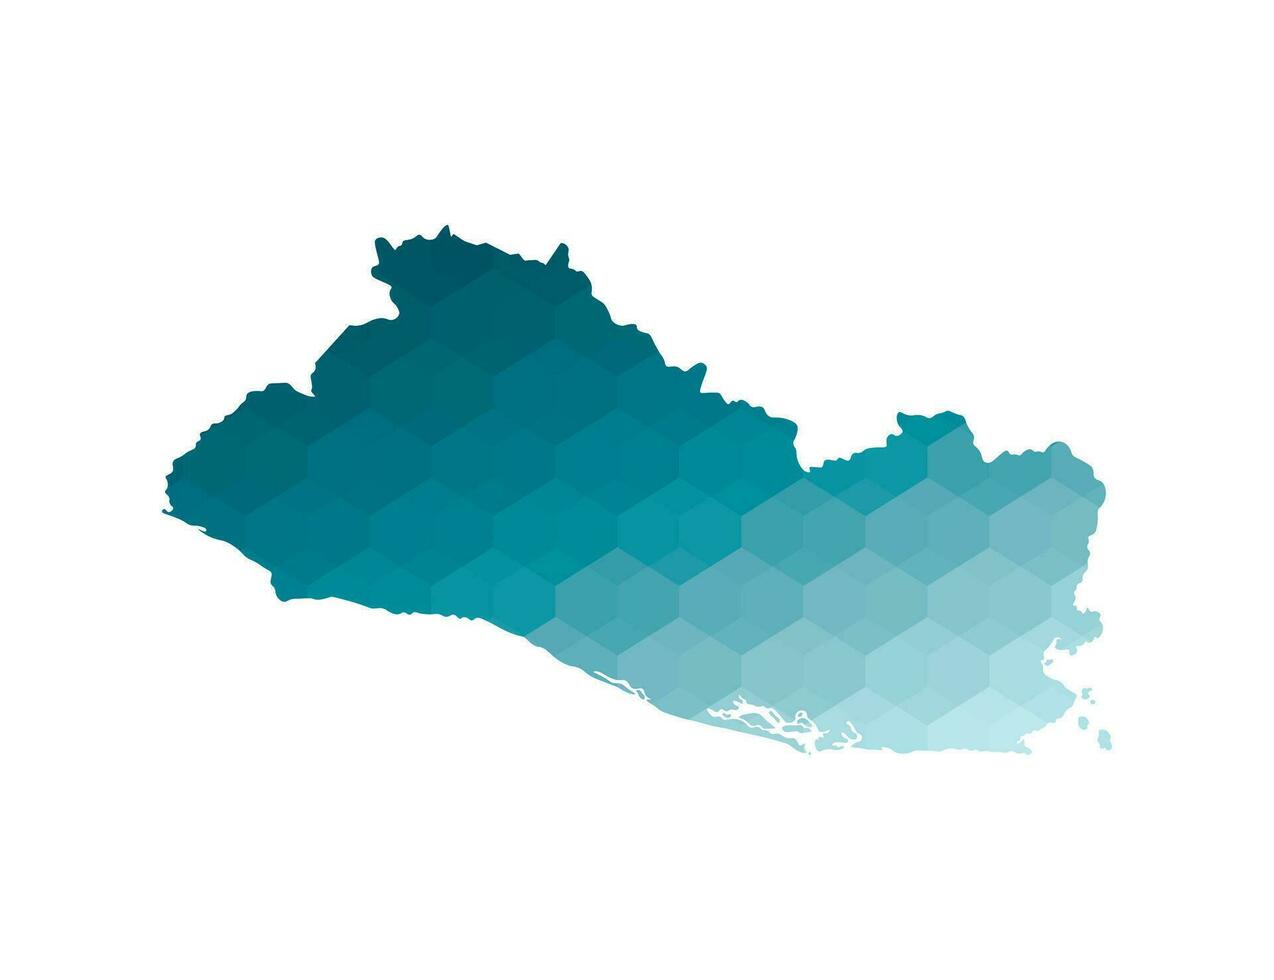 Vector isolated illustration icon with simplified blue silhouette of El Salvador map. Polygonal geometric style. White background.